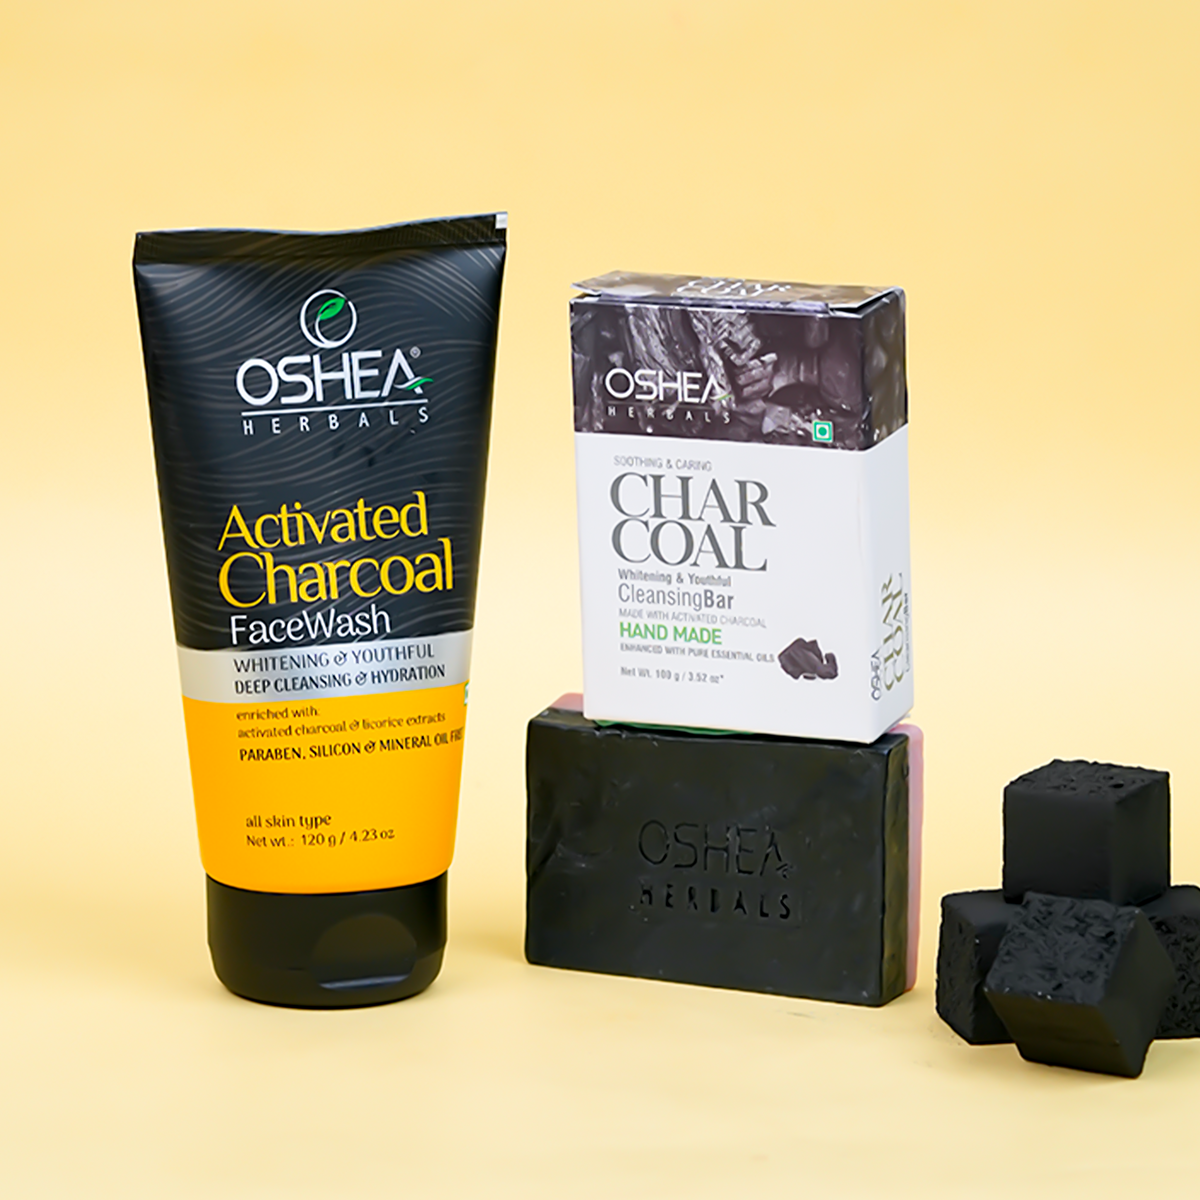 Activated Charcoal Face Wash + Charcoal Cleansing Bar Combo